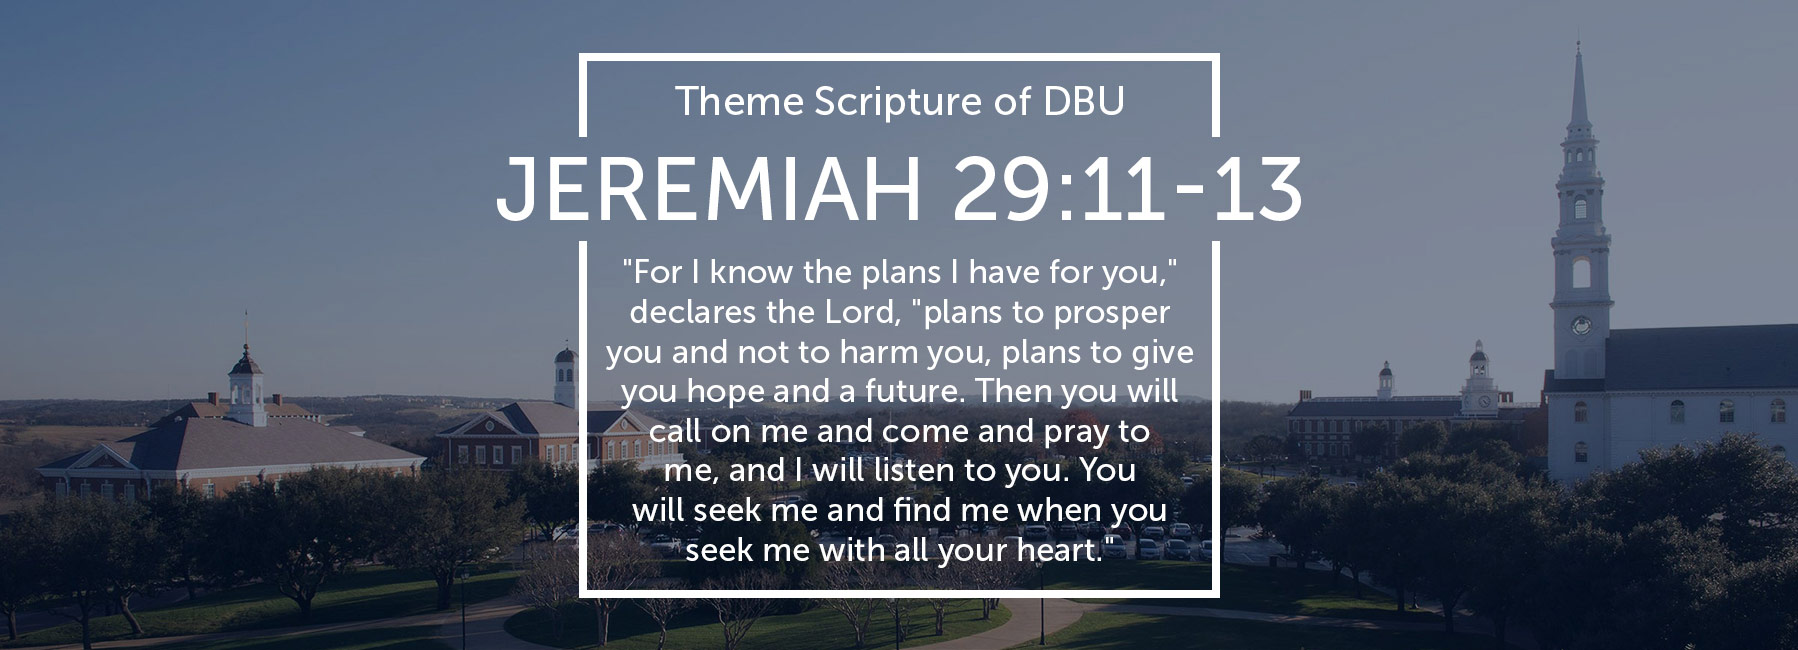 DBU Campus picture of the Quad with the Theme Scripture of DBU - Jeremiah 29:11-13 - "For I know the plans I have for you," declares the Lord, "plans to prosper you and not to harm you, plans to give you hope and a future. Then you will call on me and come and pray to me, and I will listen to you. You will seek me and find me when you seek me with all your heart."